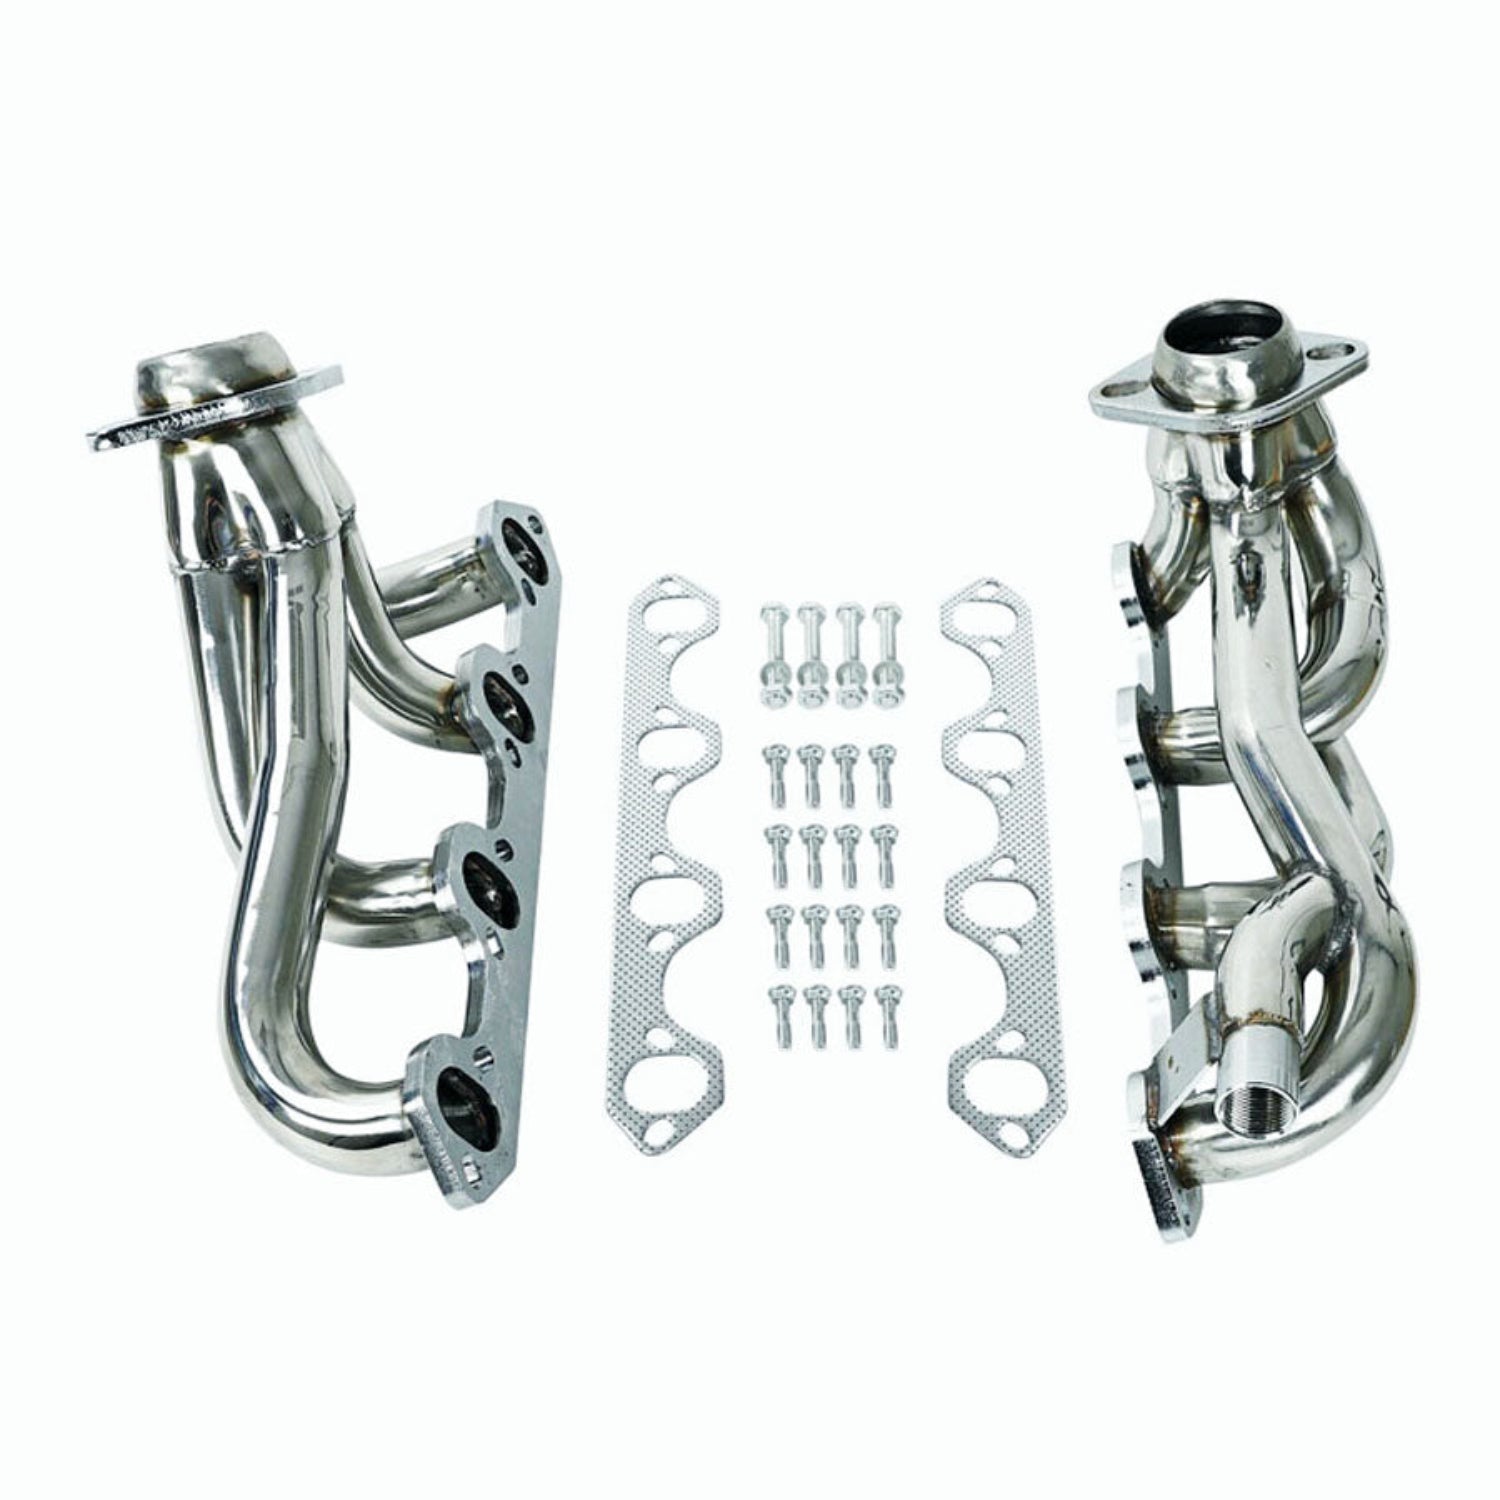 Stainless Steel Exhaust Header Manifold for Ford F150 F250 Bronco 1987-1996 5.8L V8